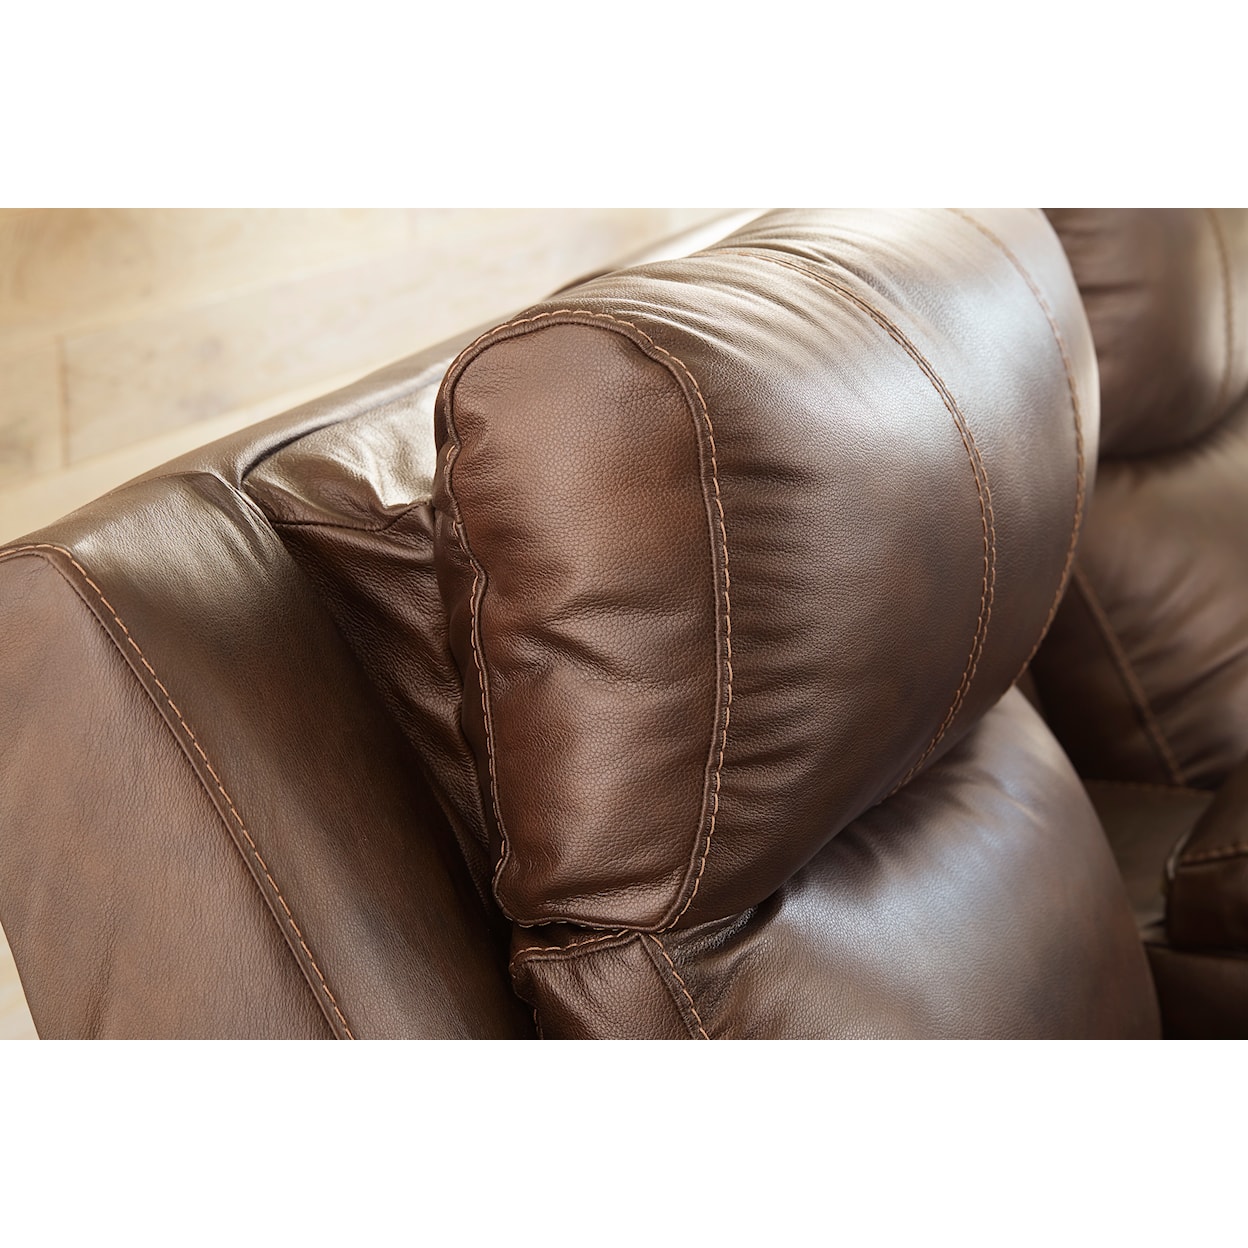 Benchcraft Edmar Power Reclining Loveseat with Console